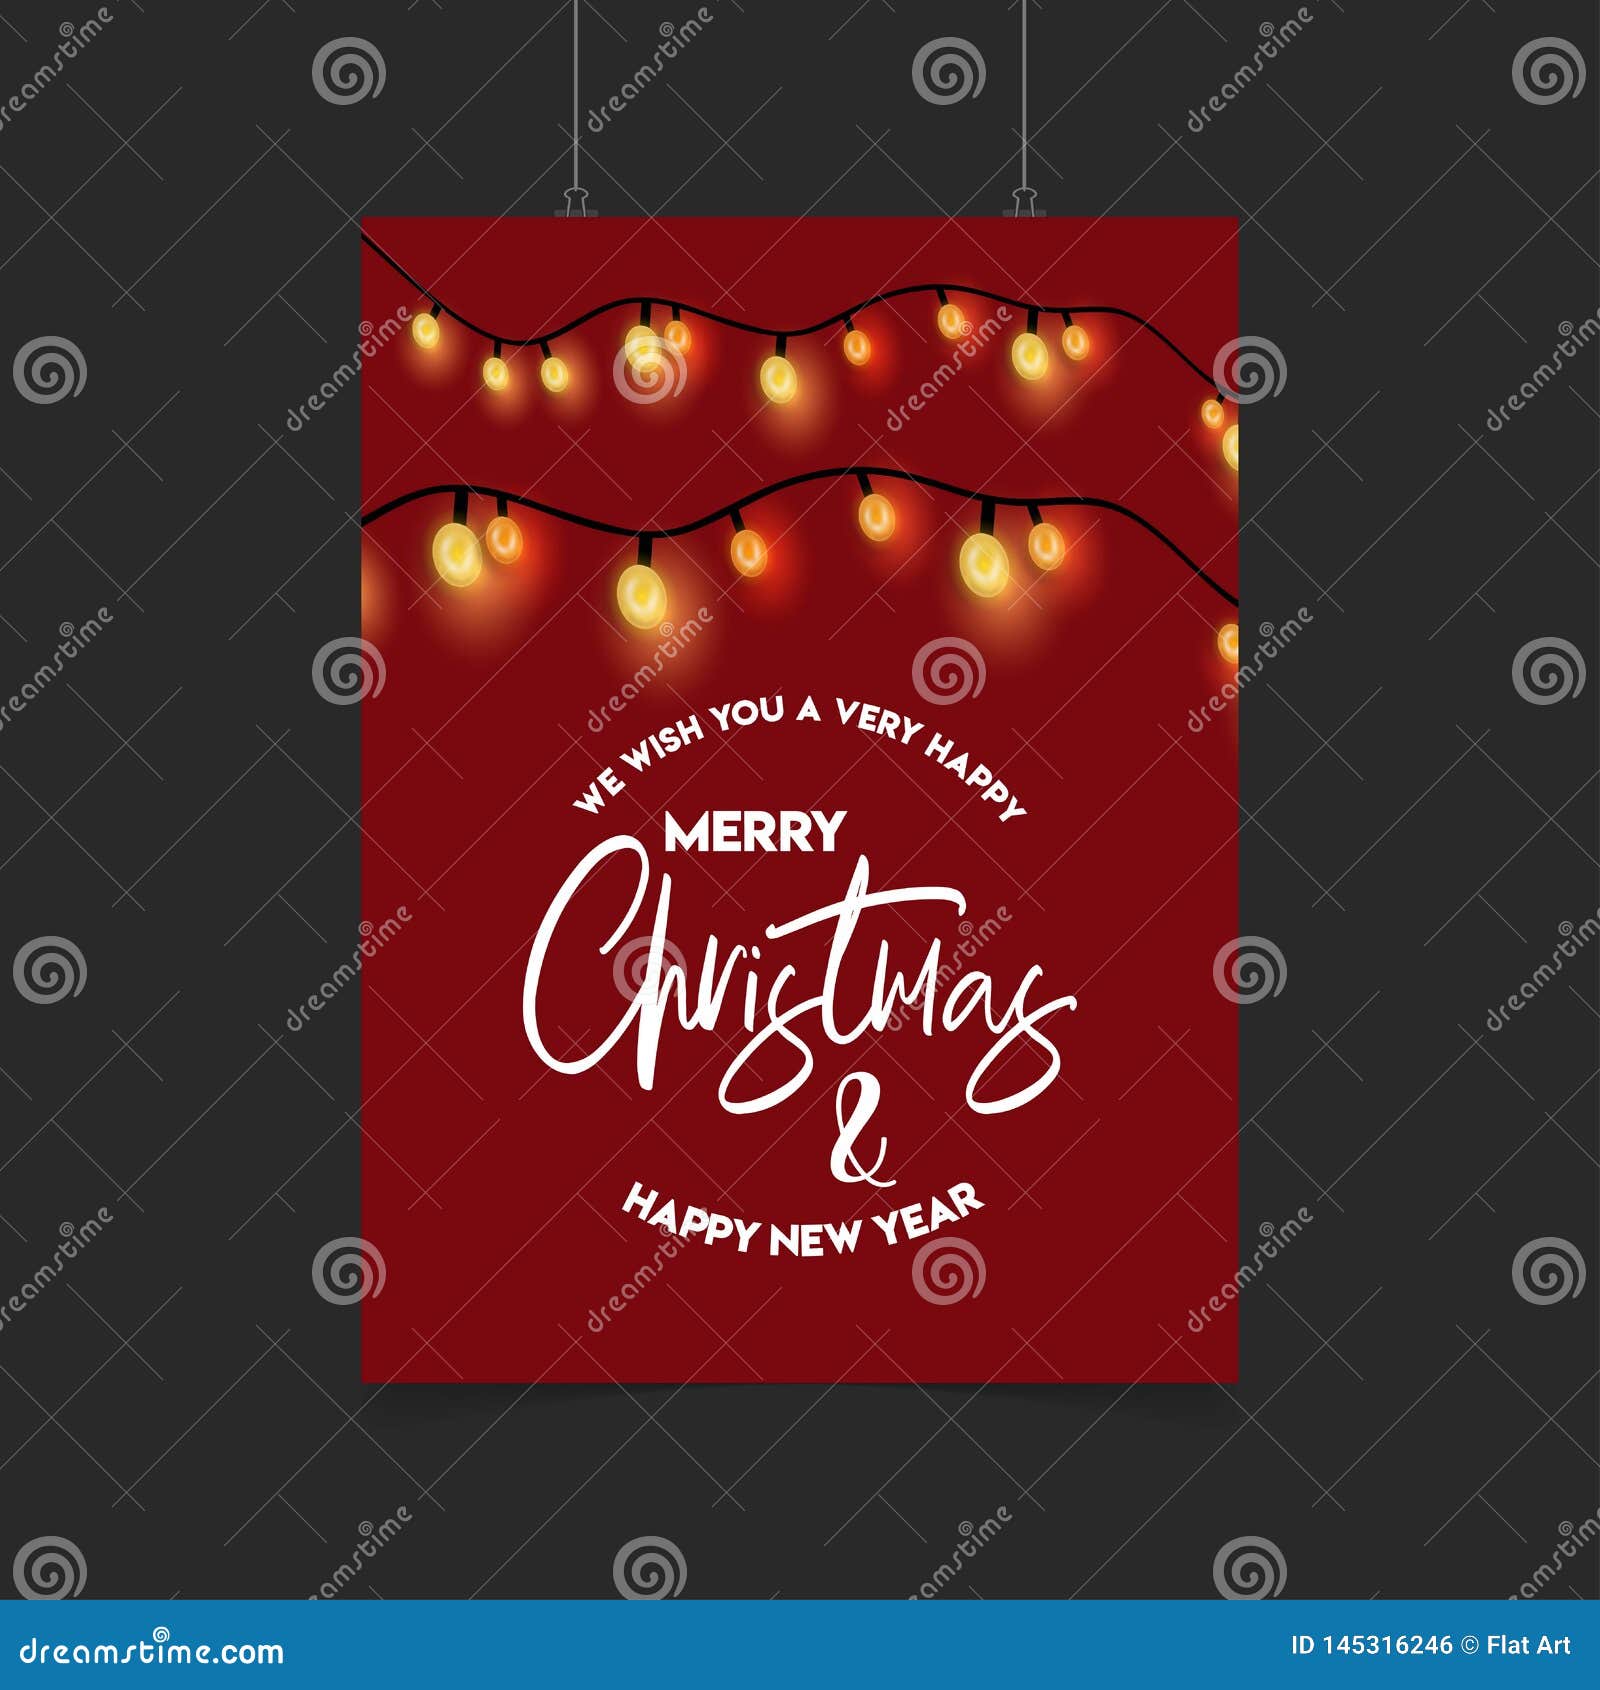 merry christmas red decoration ligh poster template